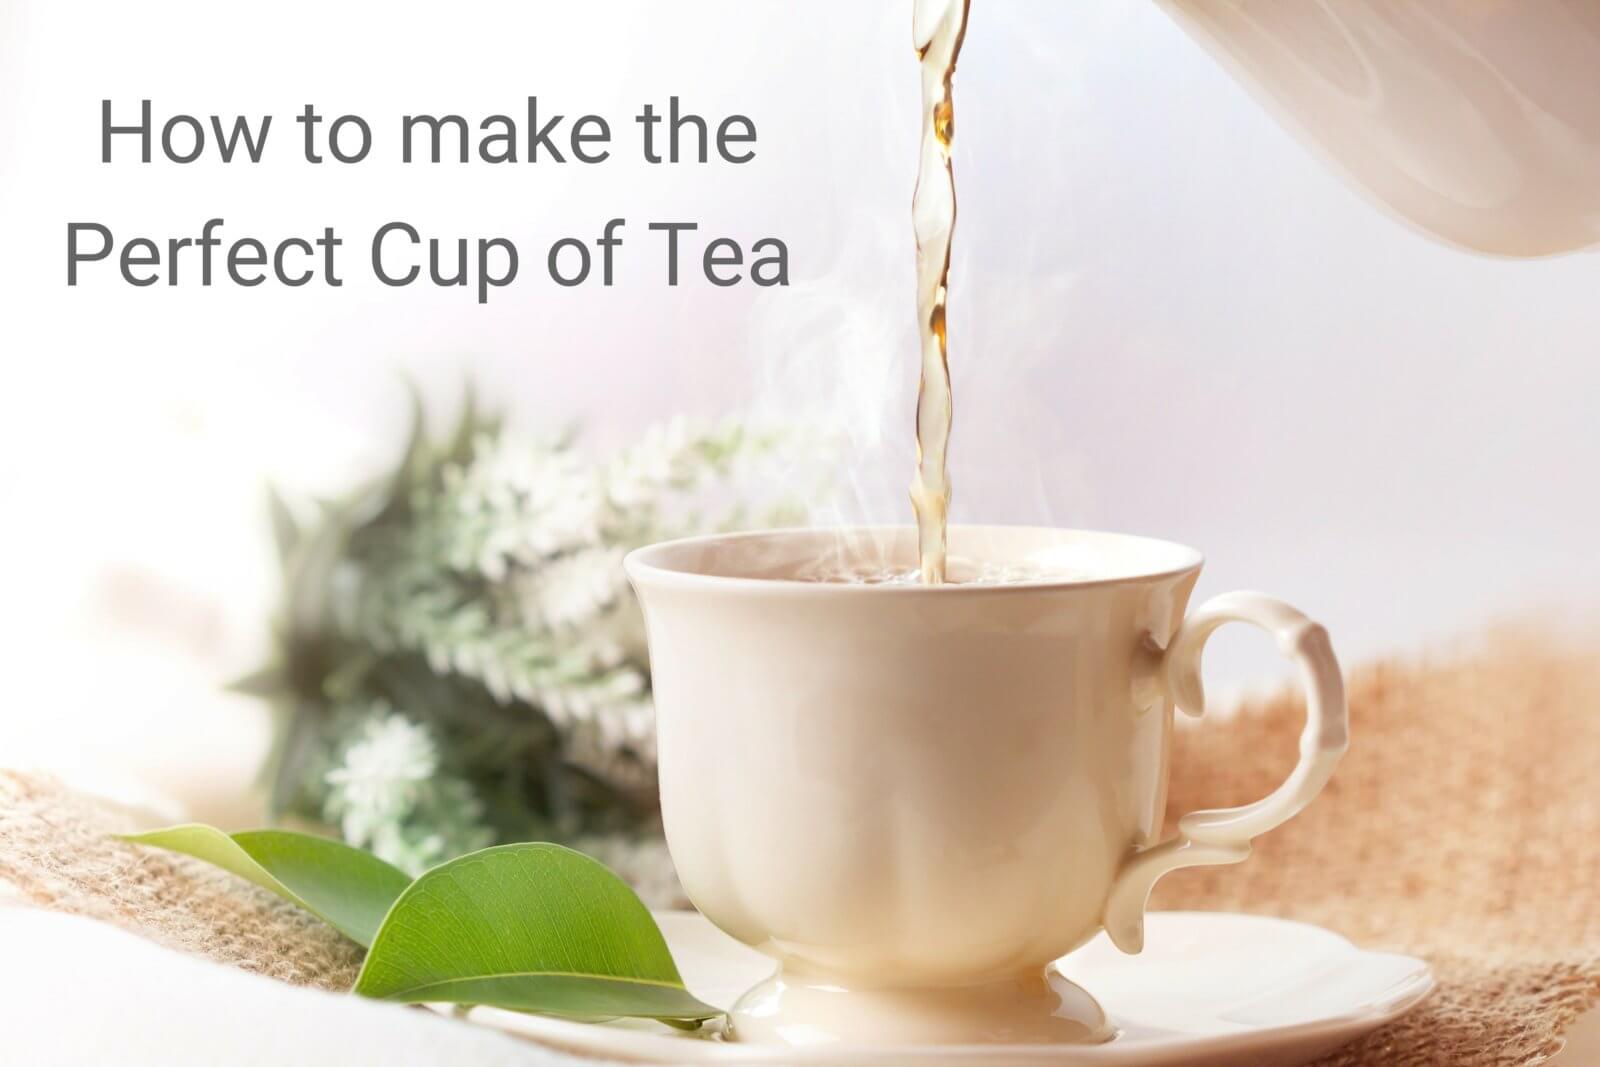 https://www.derbyvintagechinahire.co.uk/wp-content/uploads/2018/03/How-to-make-the-Perfect-Cup-of-Tea-1600x1067.jpg